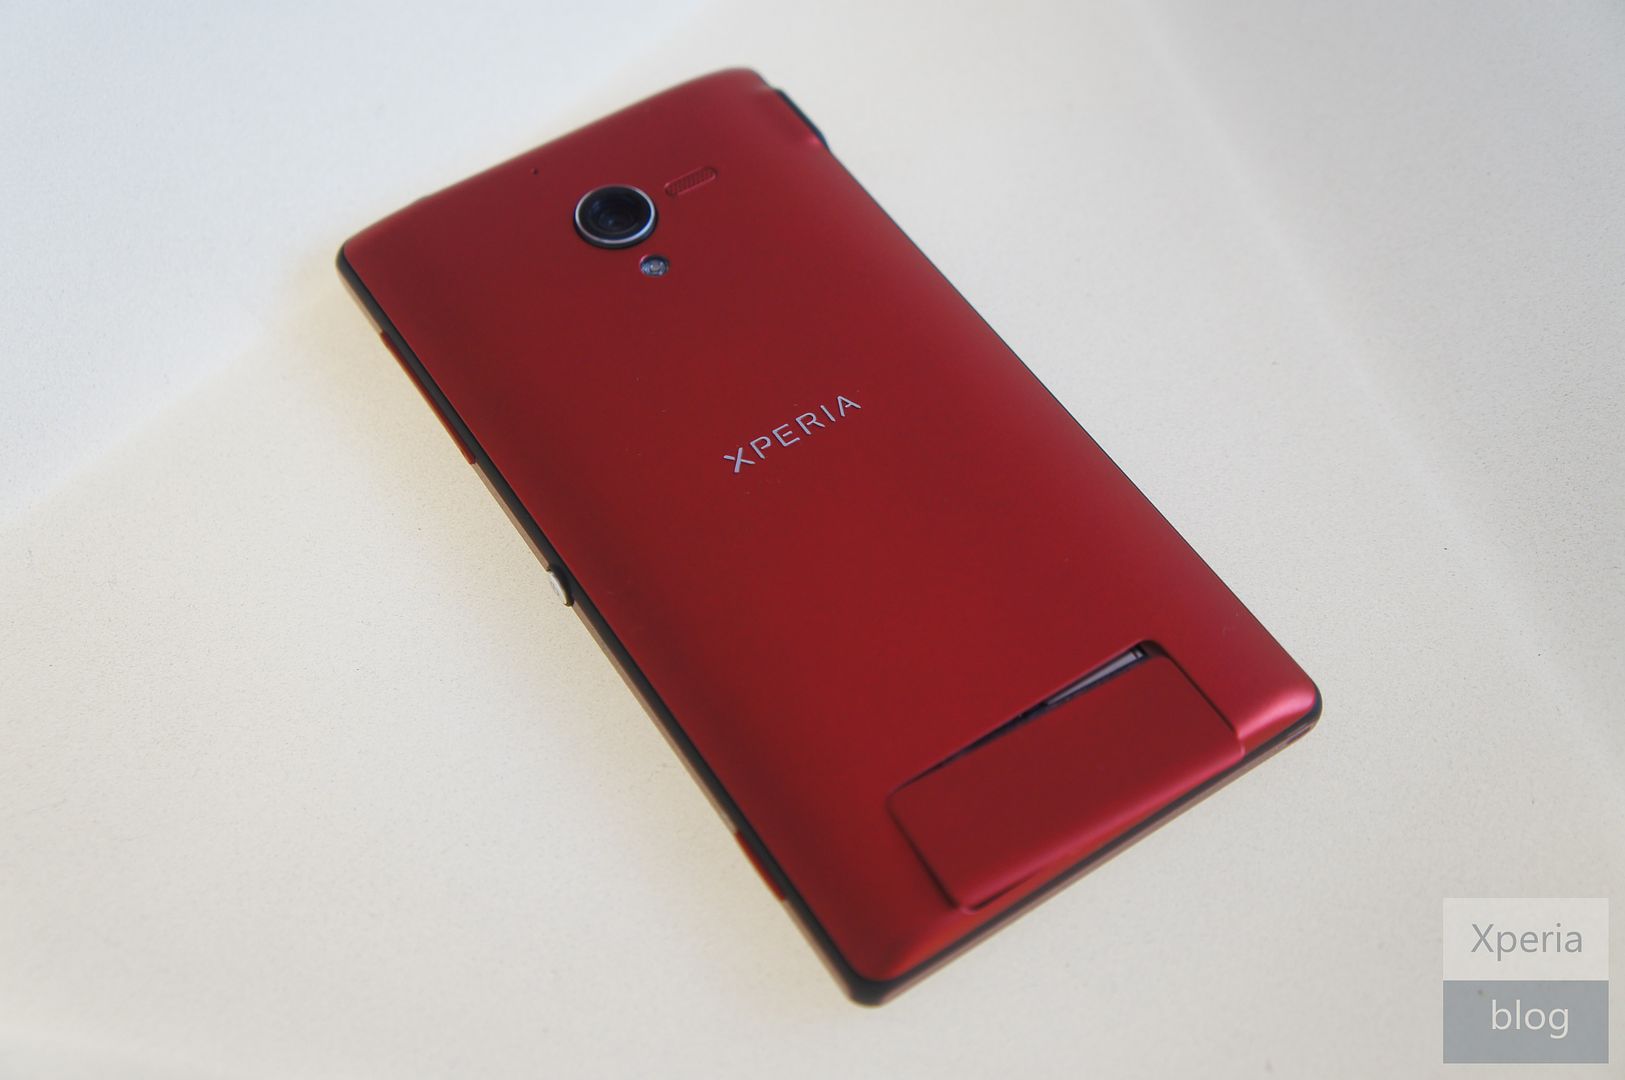 Red Xperia ZL spotted